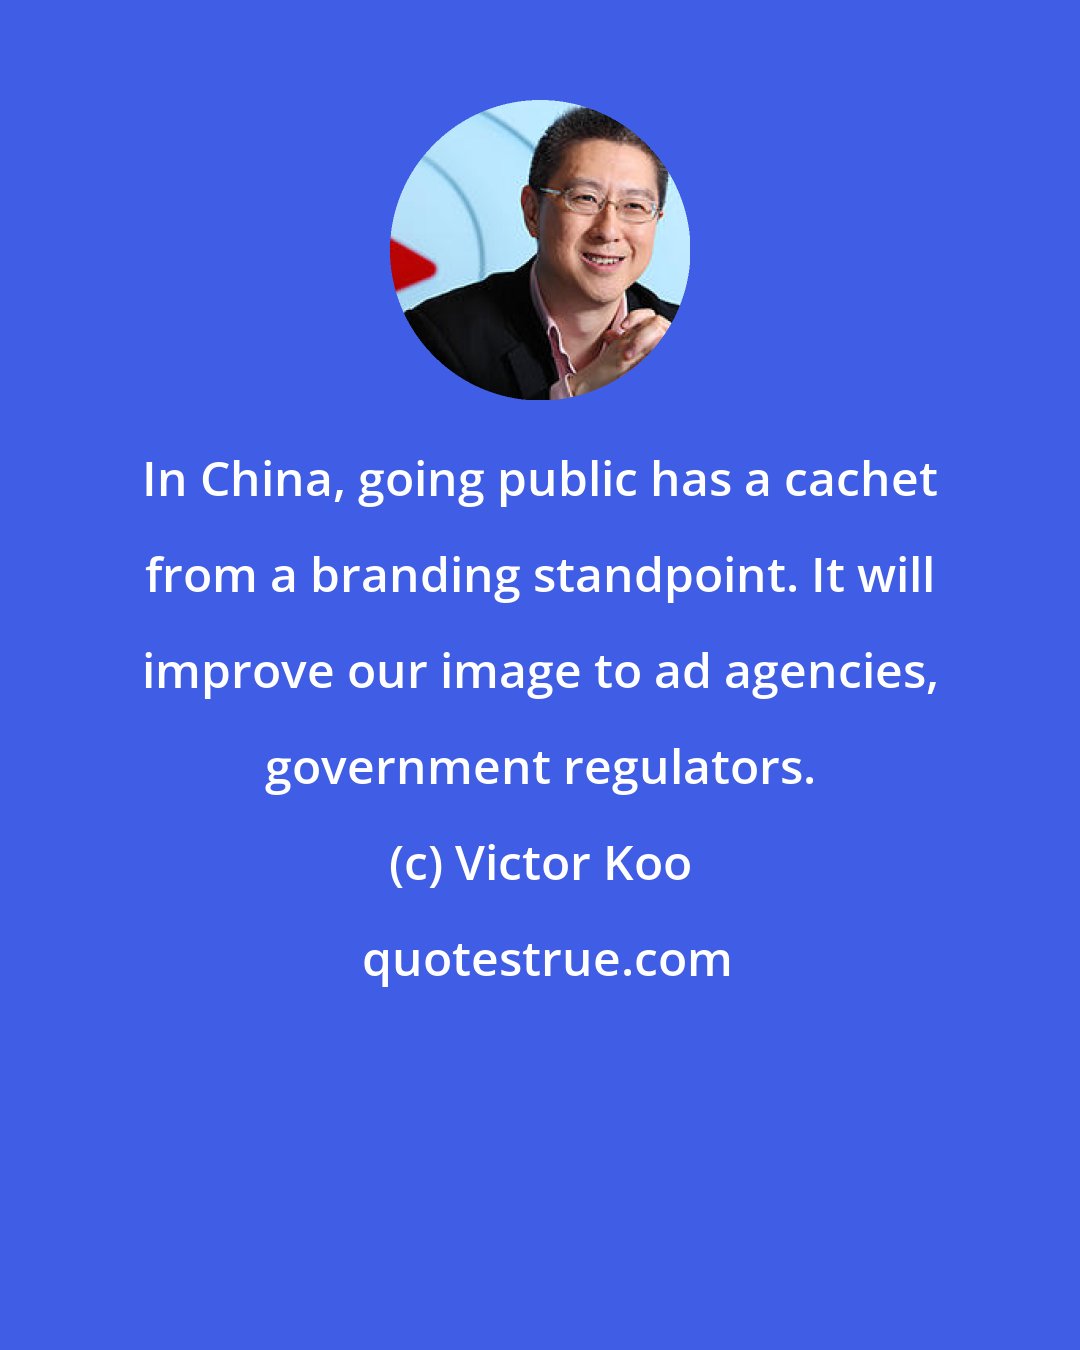 Victor Koo: In China, going public has a cachet from a branding standpoint. It will improve our image to ad agencies, government regulators.